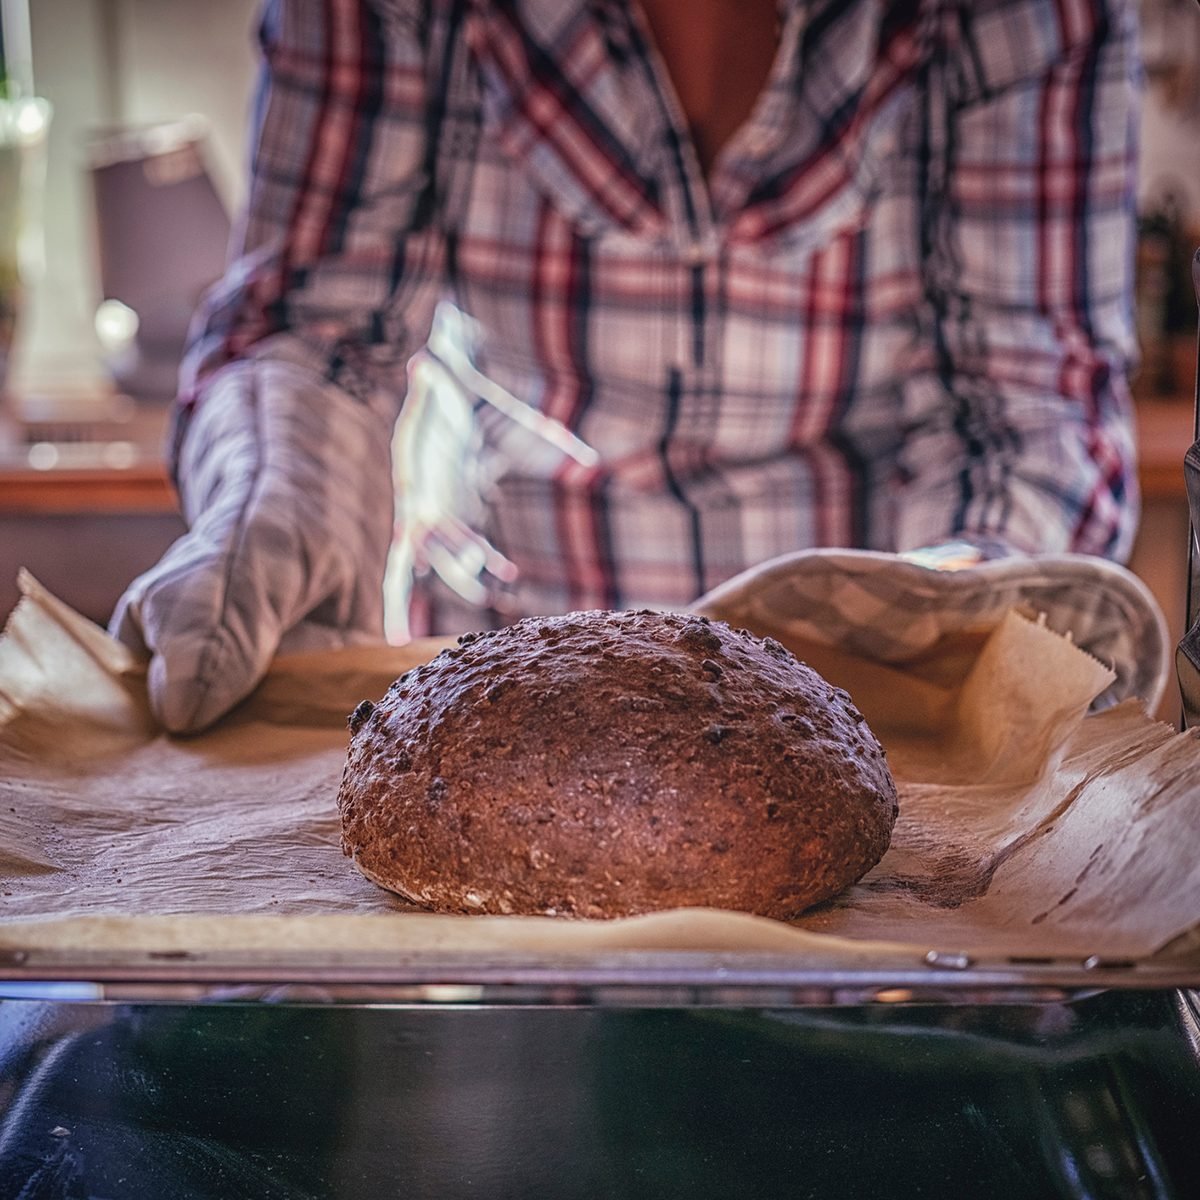 https://www.tasteofhome.com/wp-content/uploads/2020/01/baking-homemade-brown-bread-in-the-oven-GettyImages-872484274.jpg